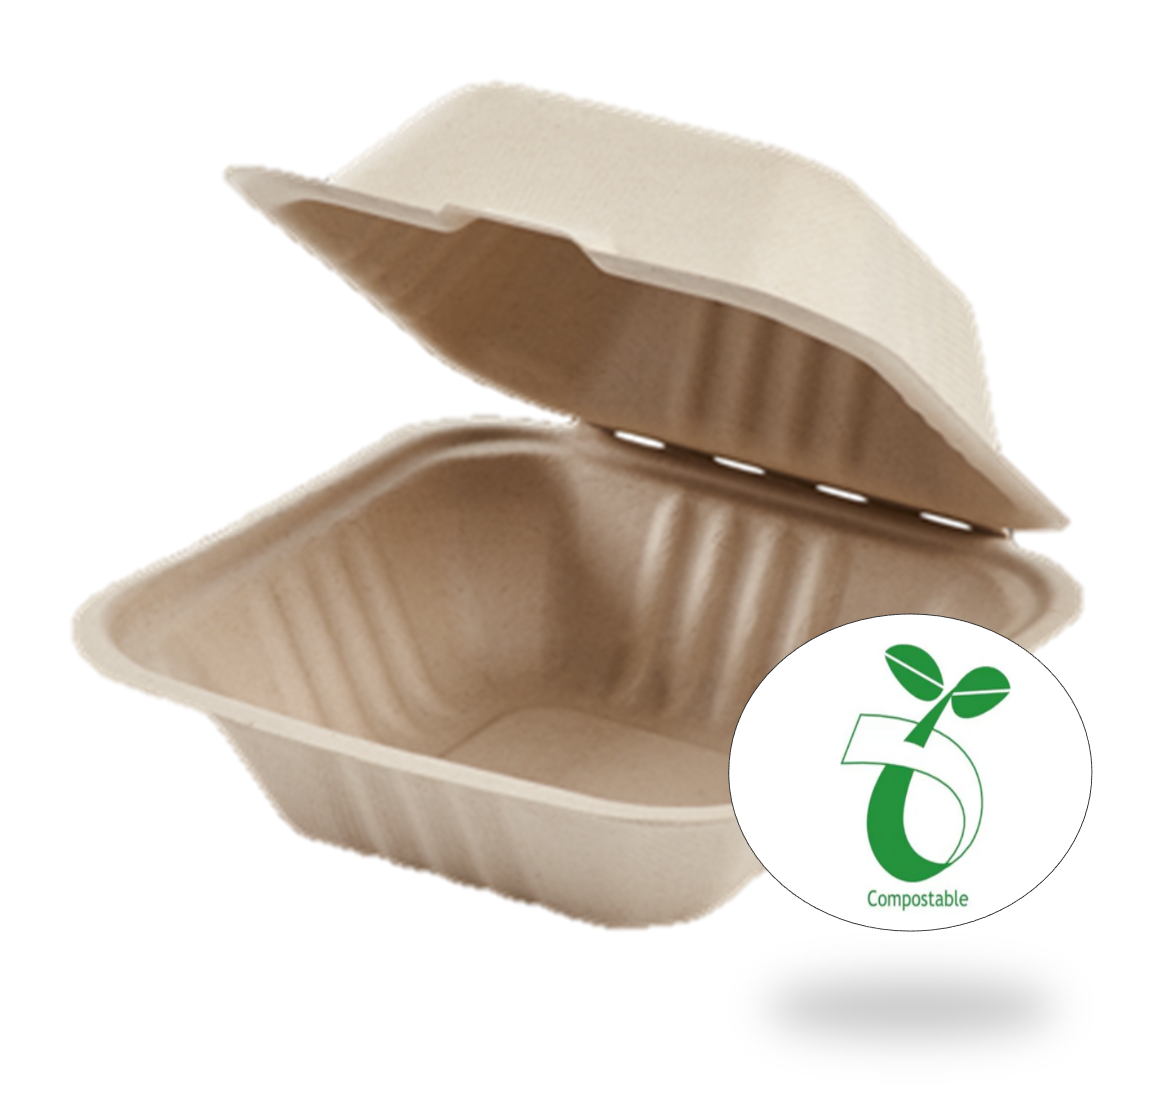 Reduce landfill with these compostable 1-compartment 6-in x 6-in x 3-in Bagasse Hinged Clamshell Food Containers constructed with reclaimed sugarcane. 